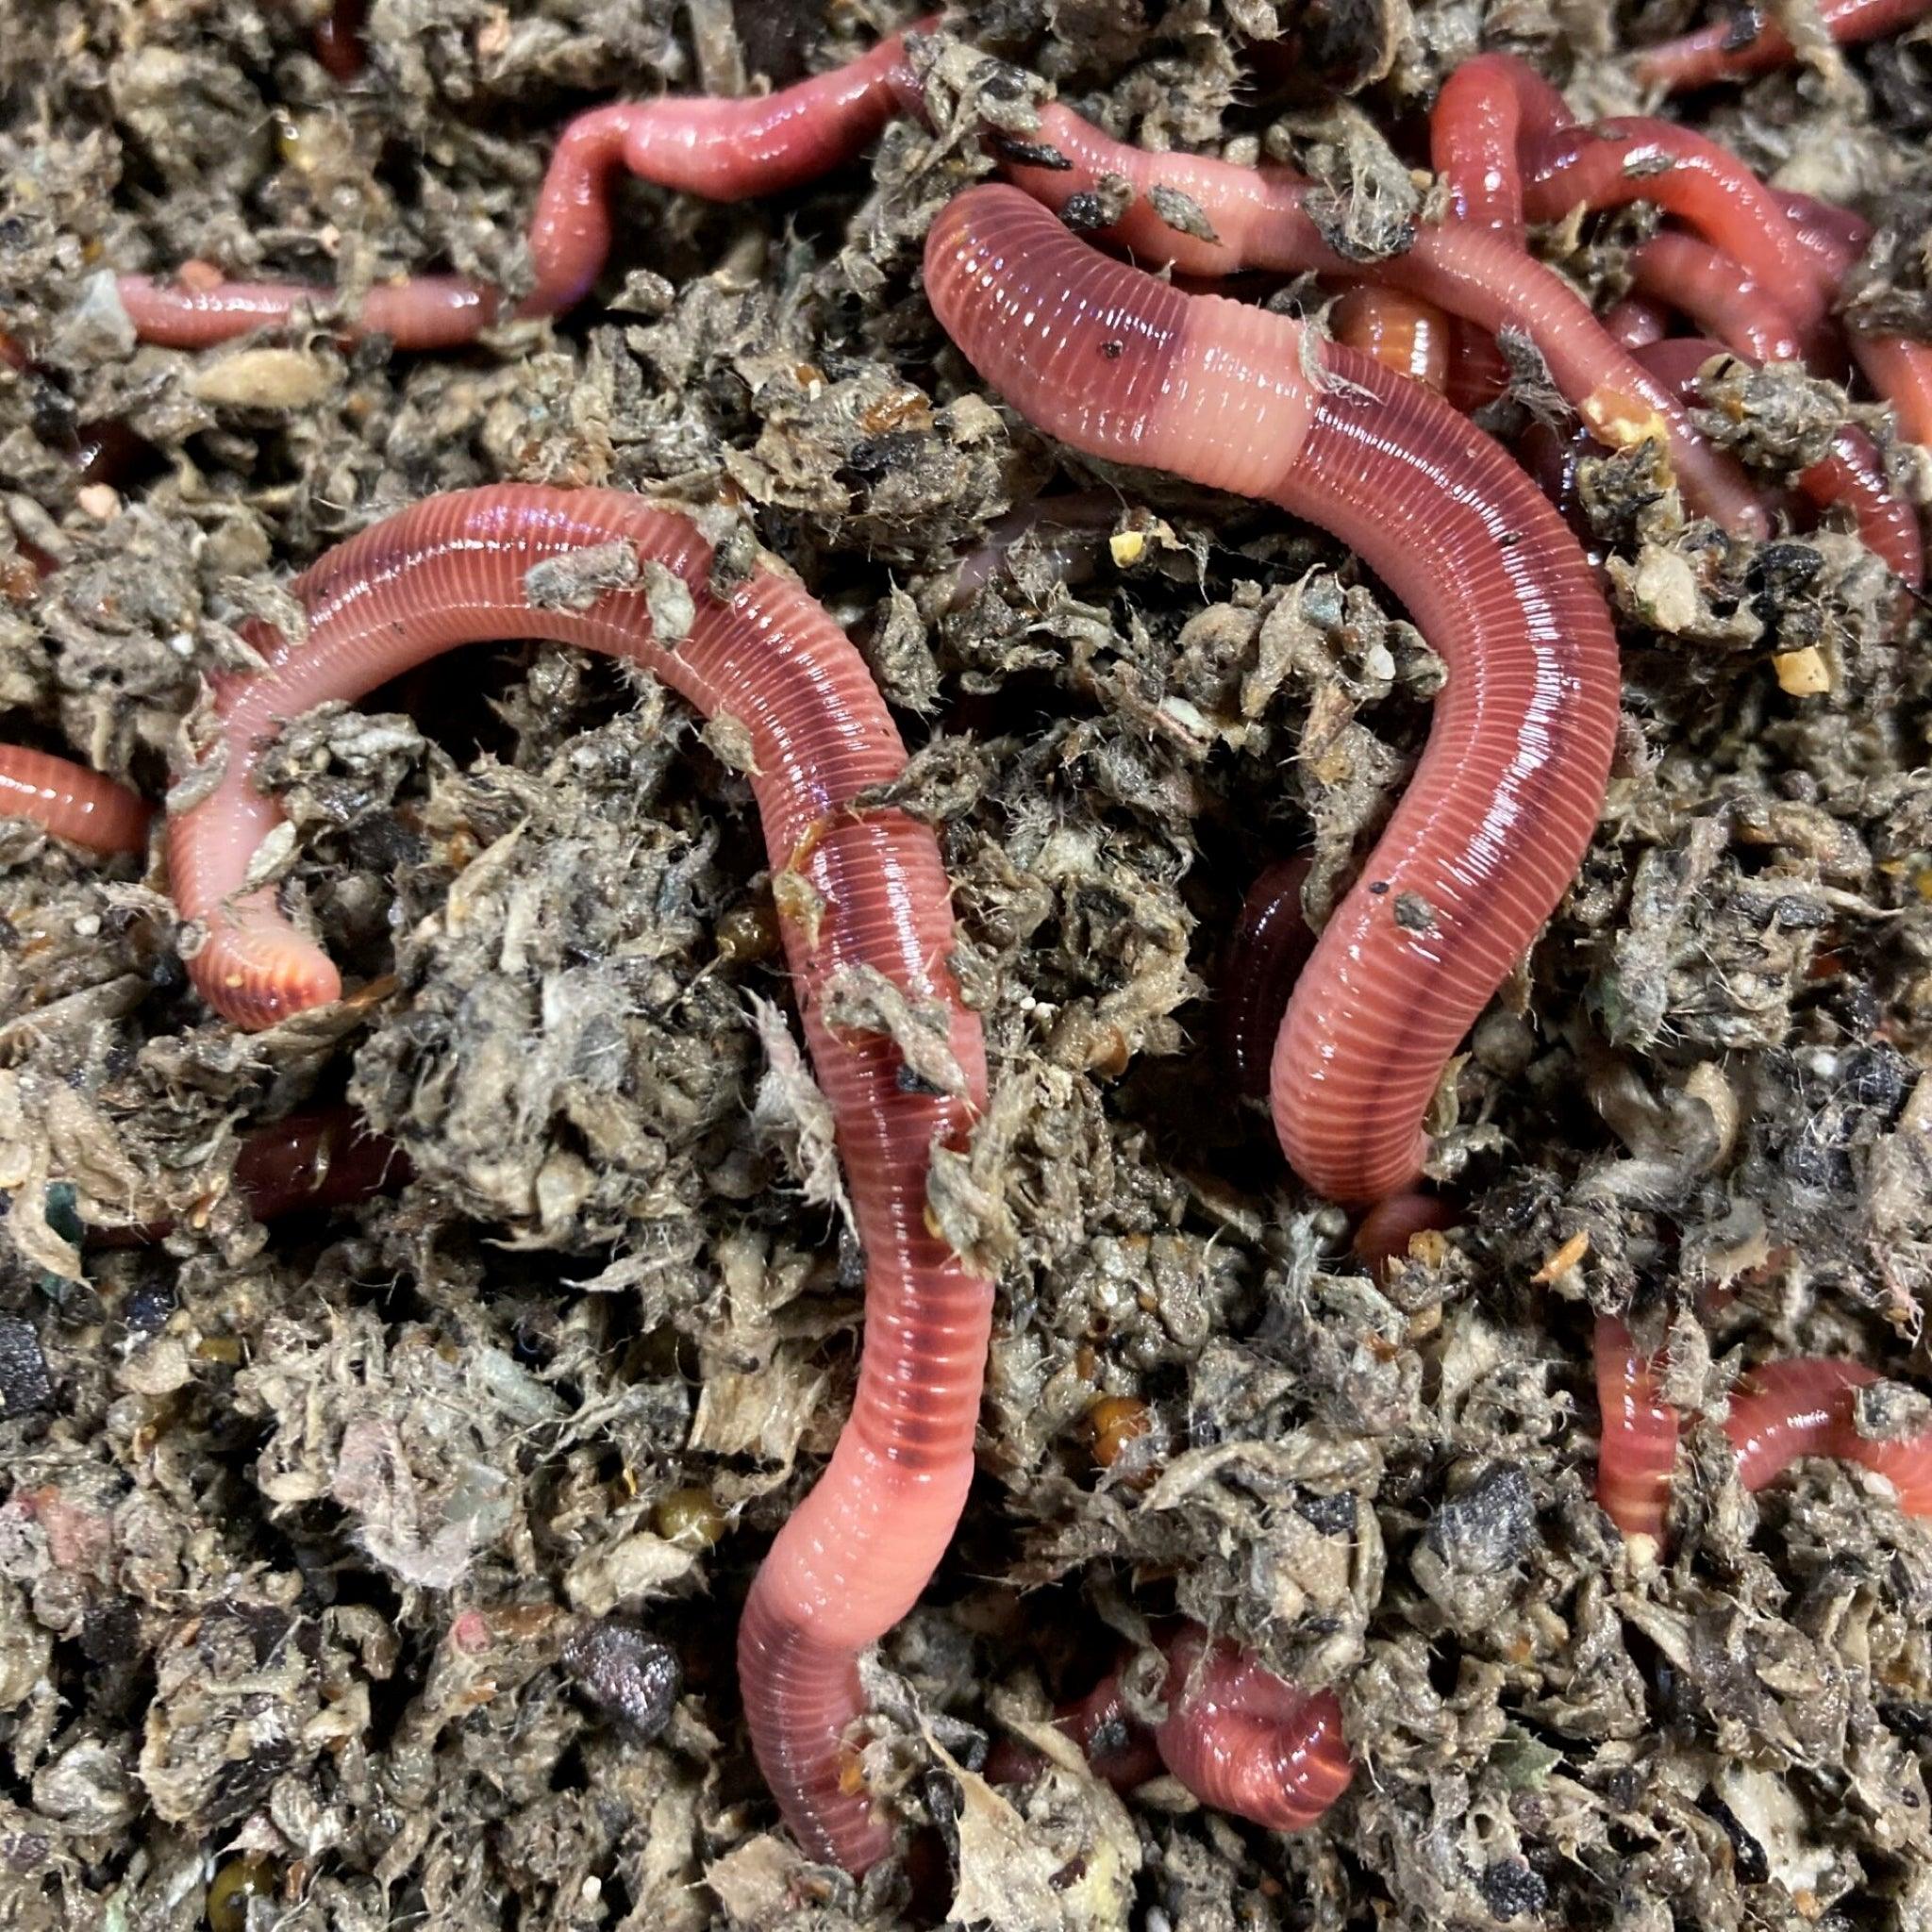 What are the best worms for composting? Indian Blues or Red